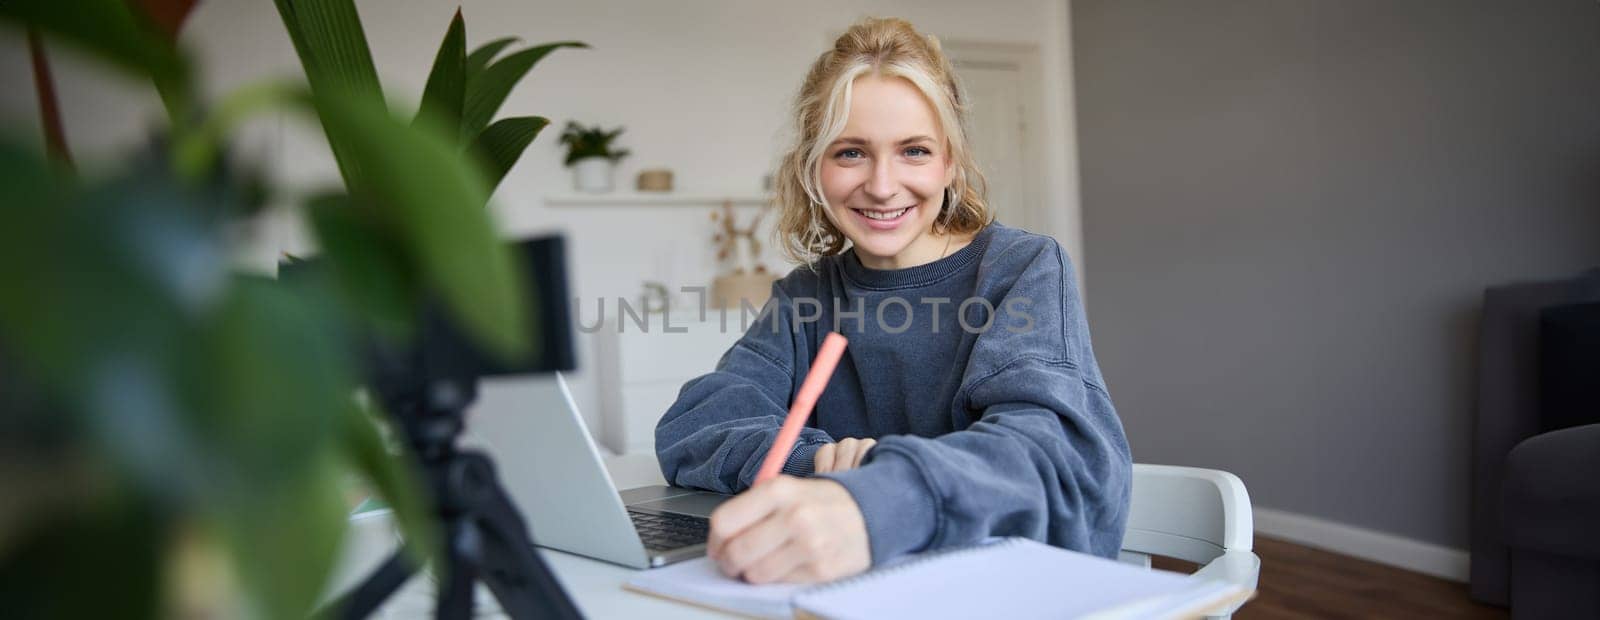 Cute smiling girl sits in a room, writes down notes, doing homework, records video of herself on digital camera, creates content for vlog, lifestyle blogger doing daily routine episode.